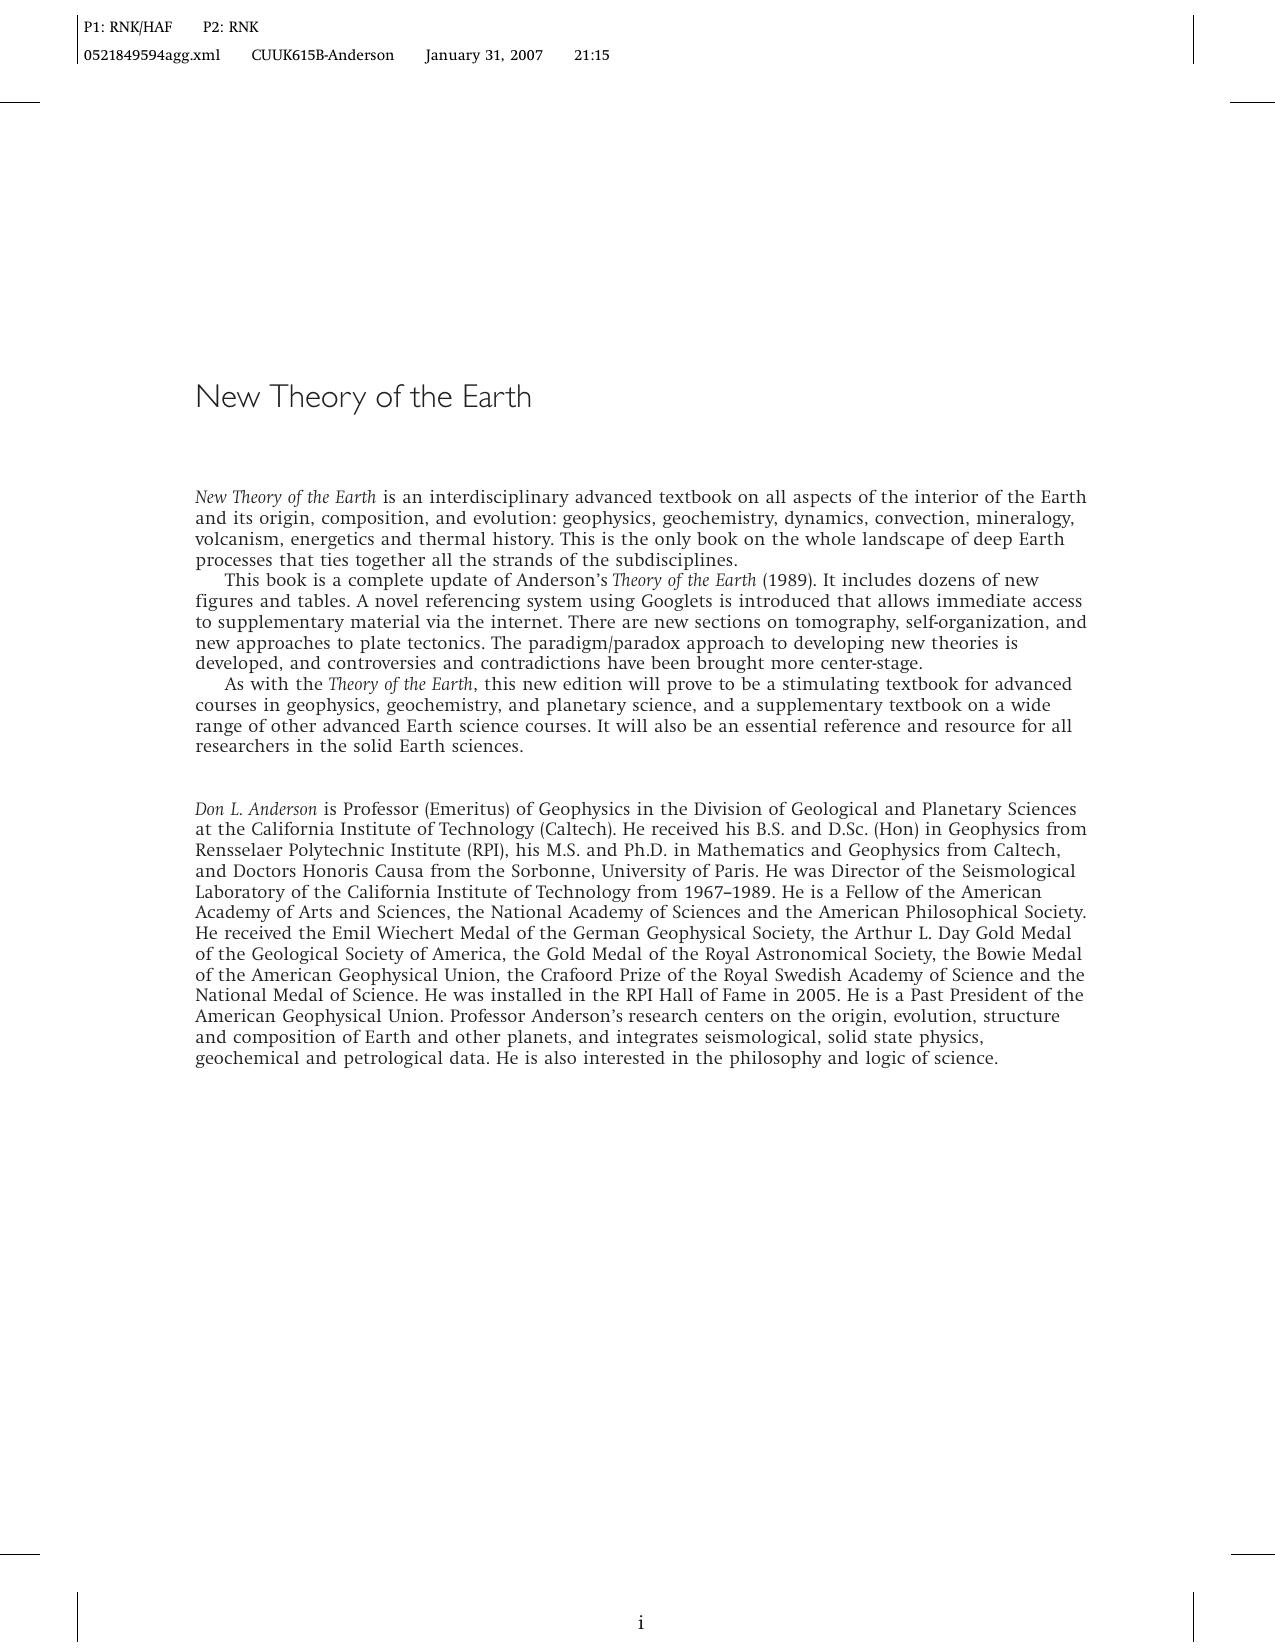 New Theory Of The Earth